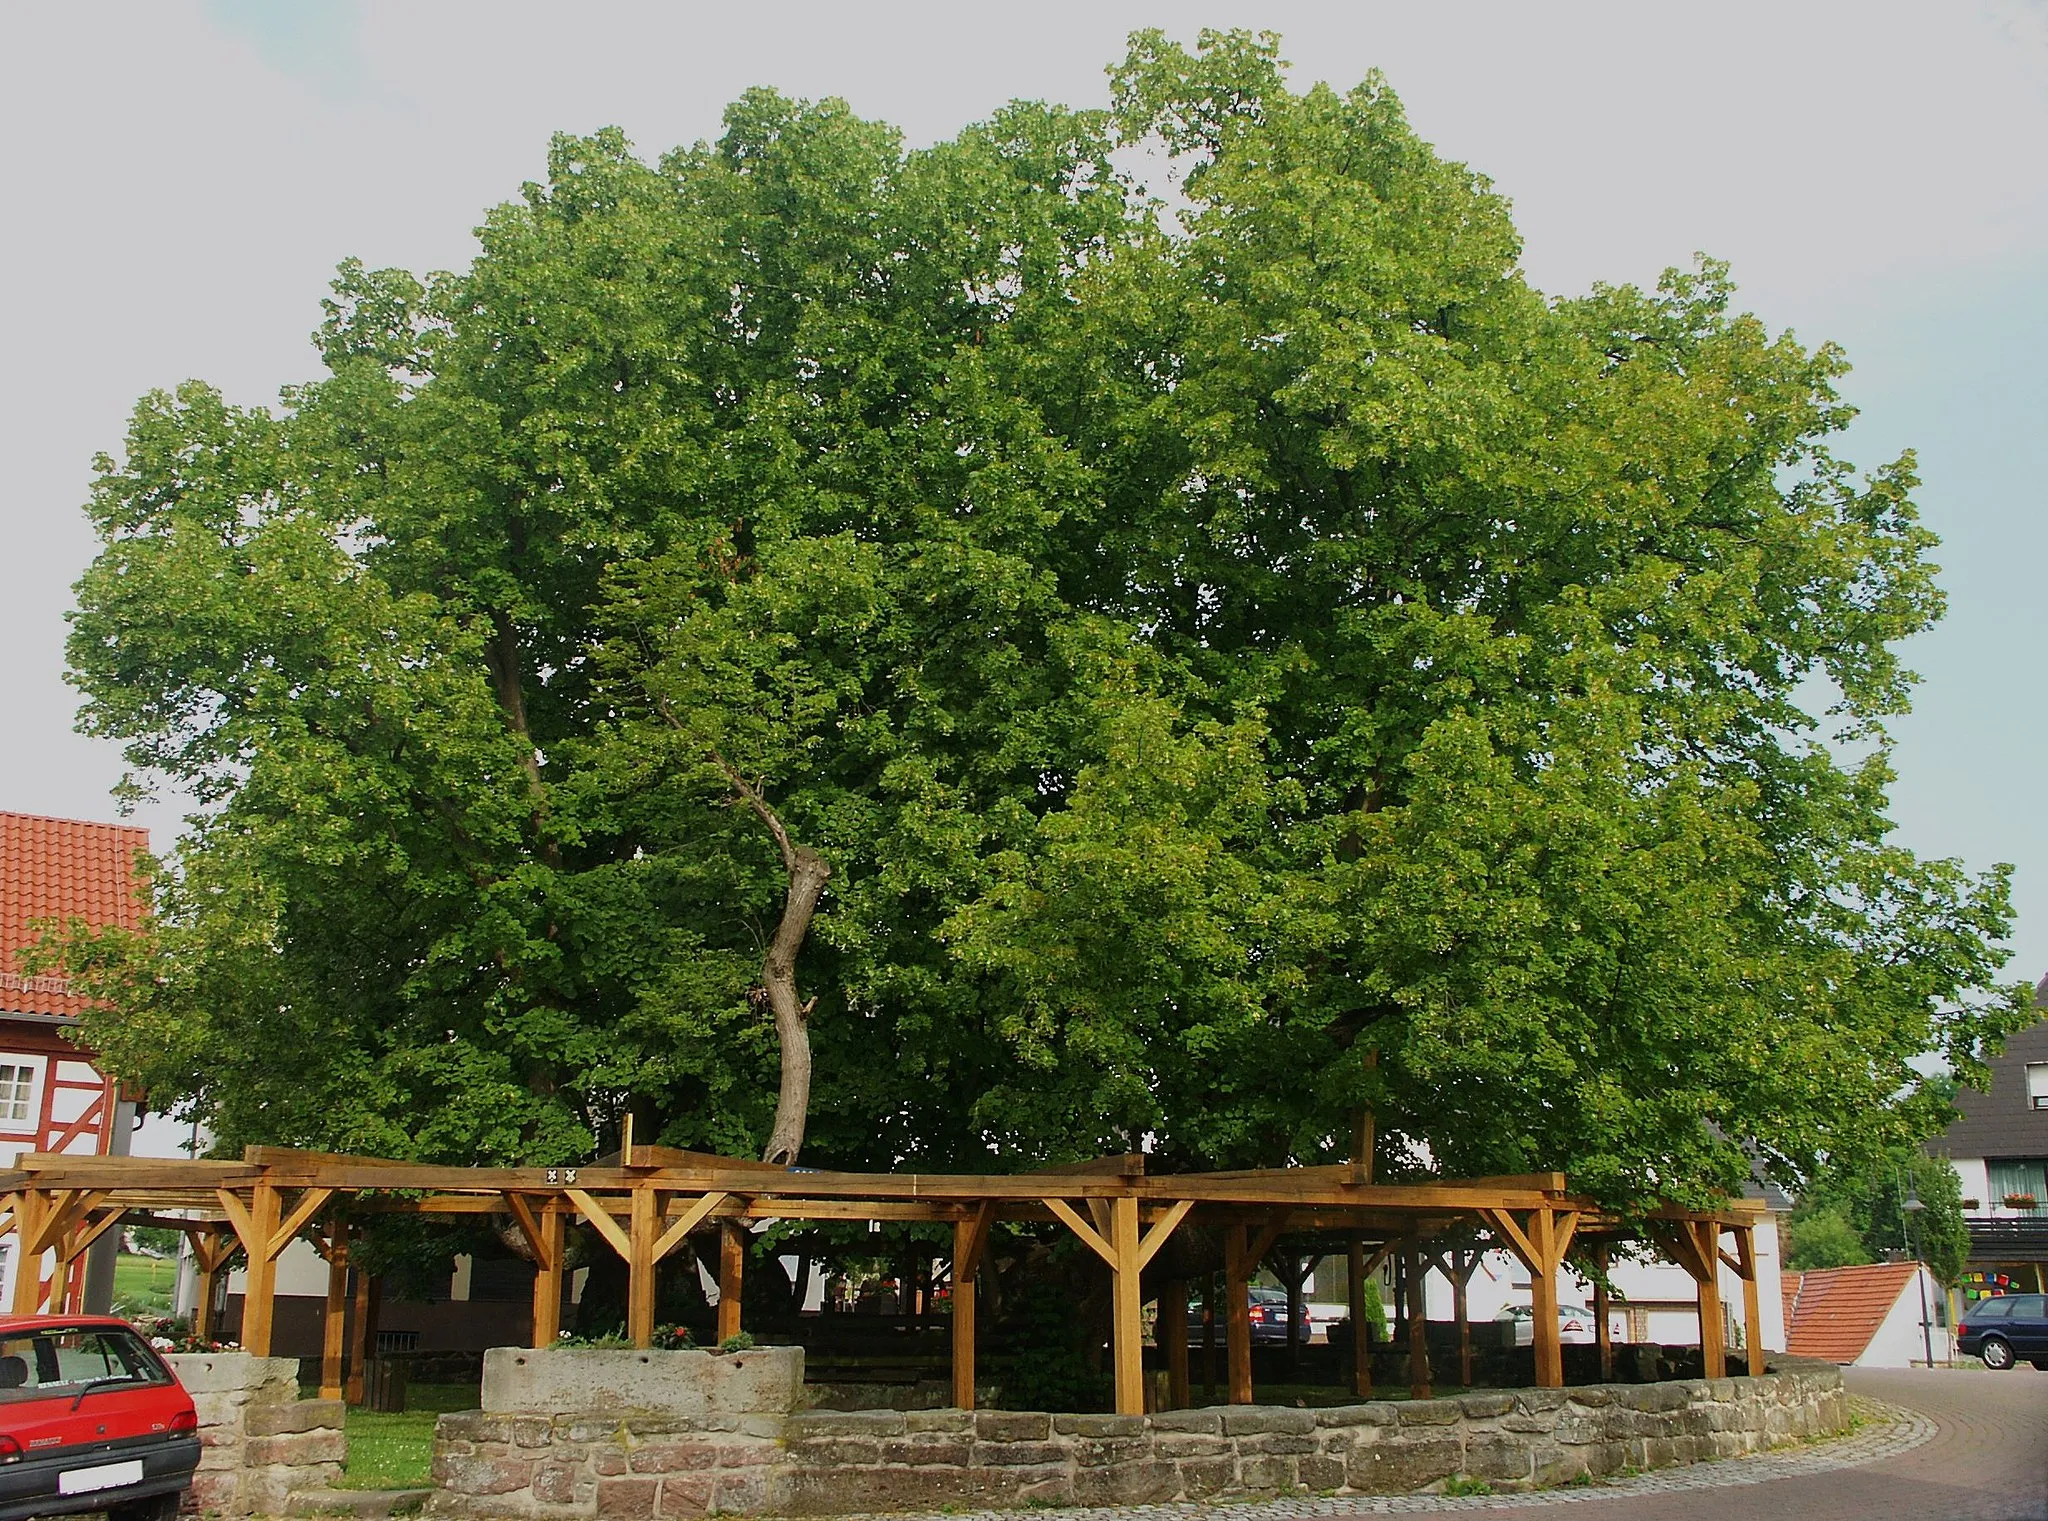 Photo showing: The lime tree (Tilia platyphyllos), around 1200 years old, it is known as the oldest tree in Germany. Is is growing in the municipality of Schenklengsfeld, near Bad Hersfeld.  Today the tree grows from four side shoots, the central trunk having died some time ago.